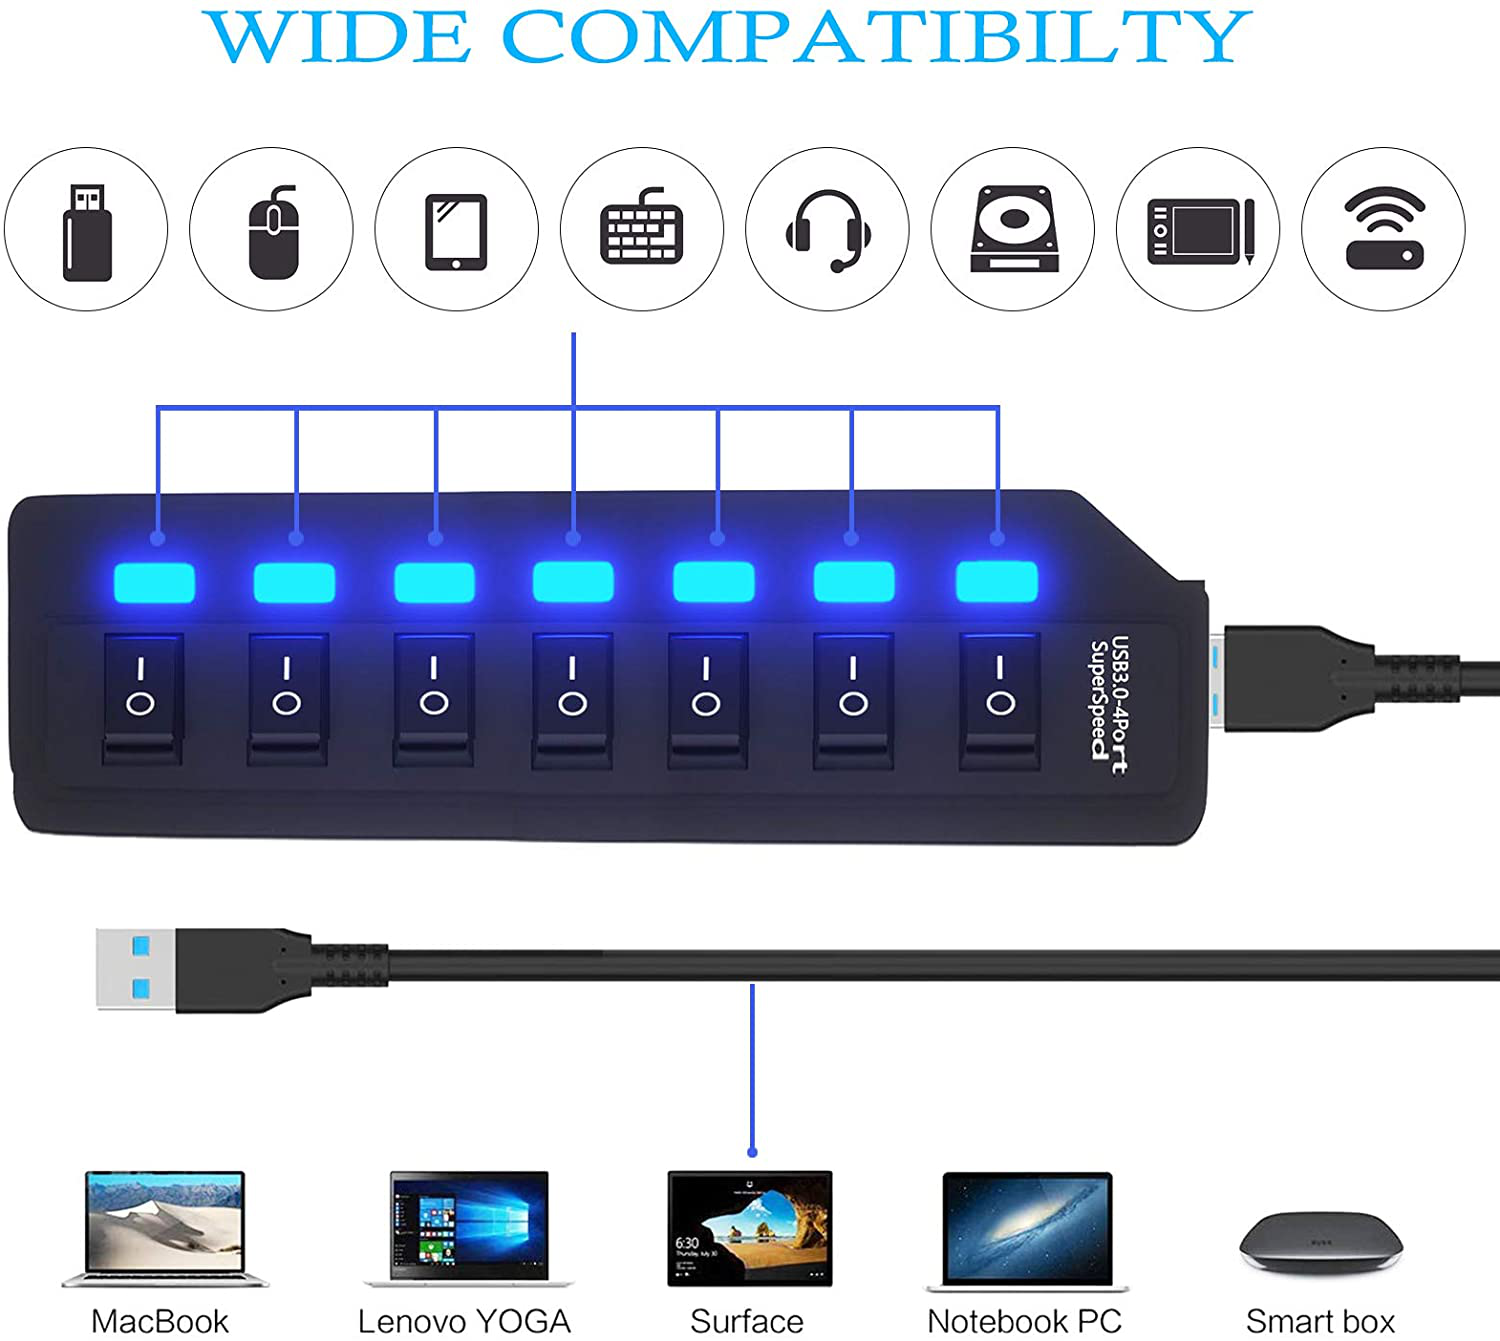 USB Hub 3.0 Splitter,7 Port USB Data Hub with Individual On/Off Switches and Lights for Laptop, PC, Computer, Mobile HDD, Flash Drive and More